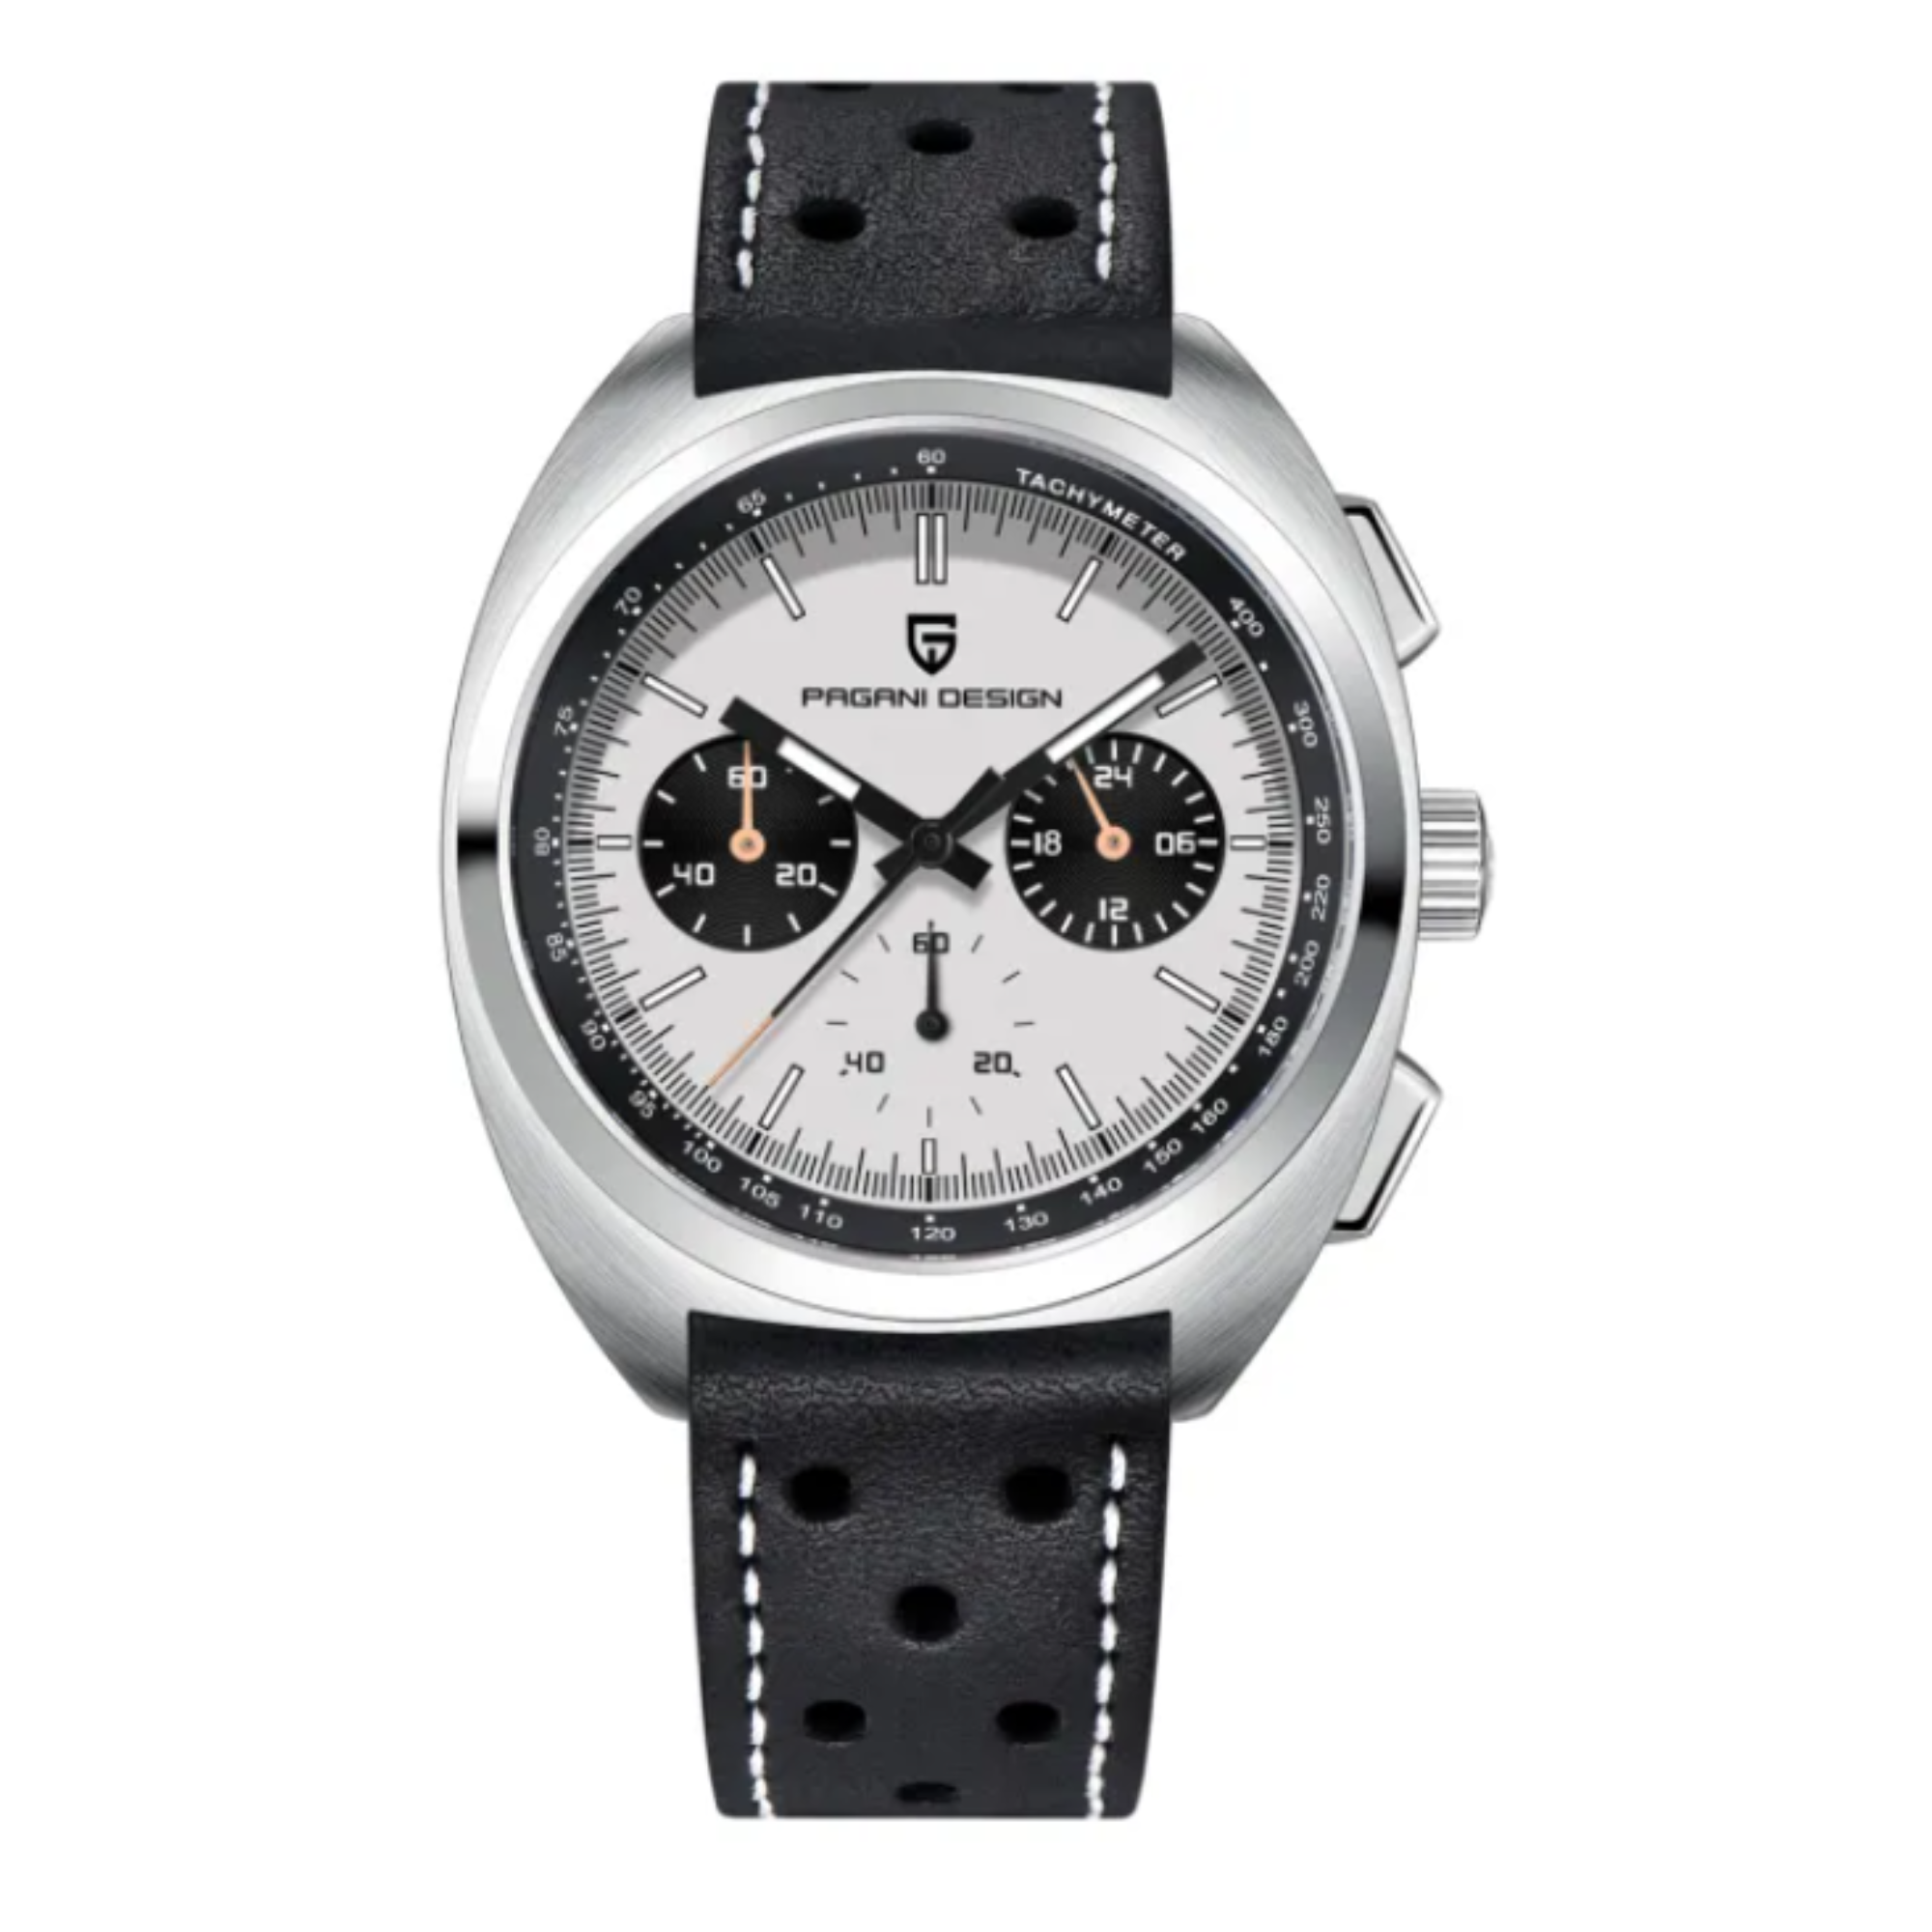 PAGANI DESIGN PD-1782 Men's Quartz Watches Chronograph Stainless Steel 40mm Sports Wrist Watch for Men - White Dial With Black Leather Strap